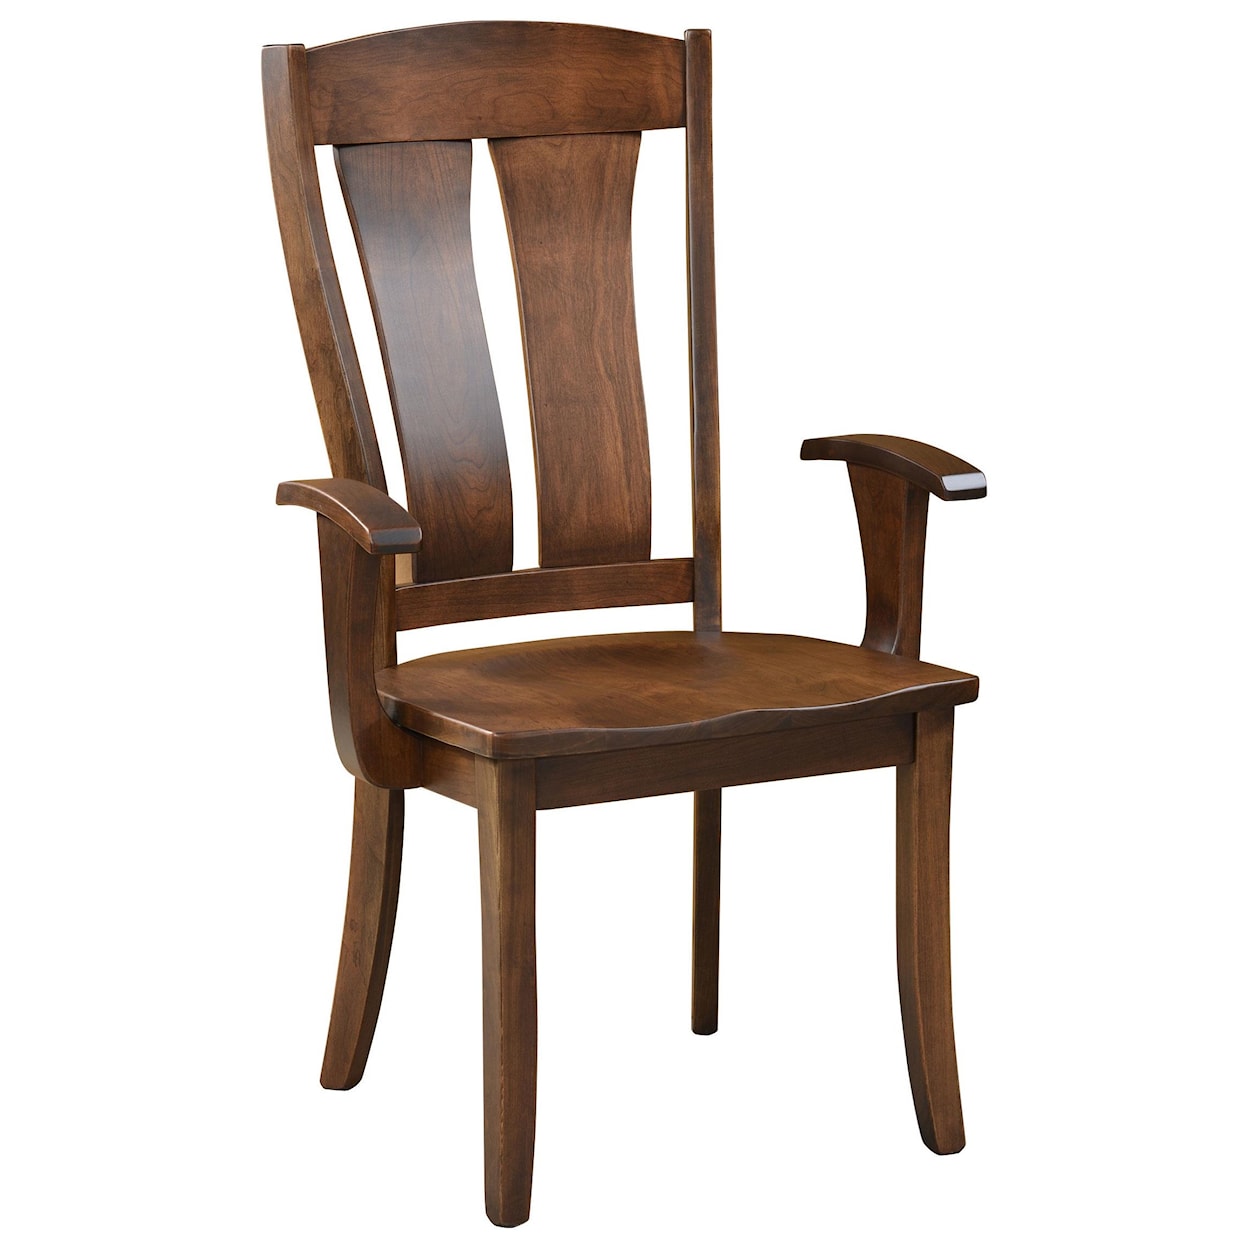 Wengerd Wood Products Omaha Arm Chair